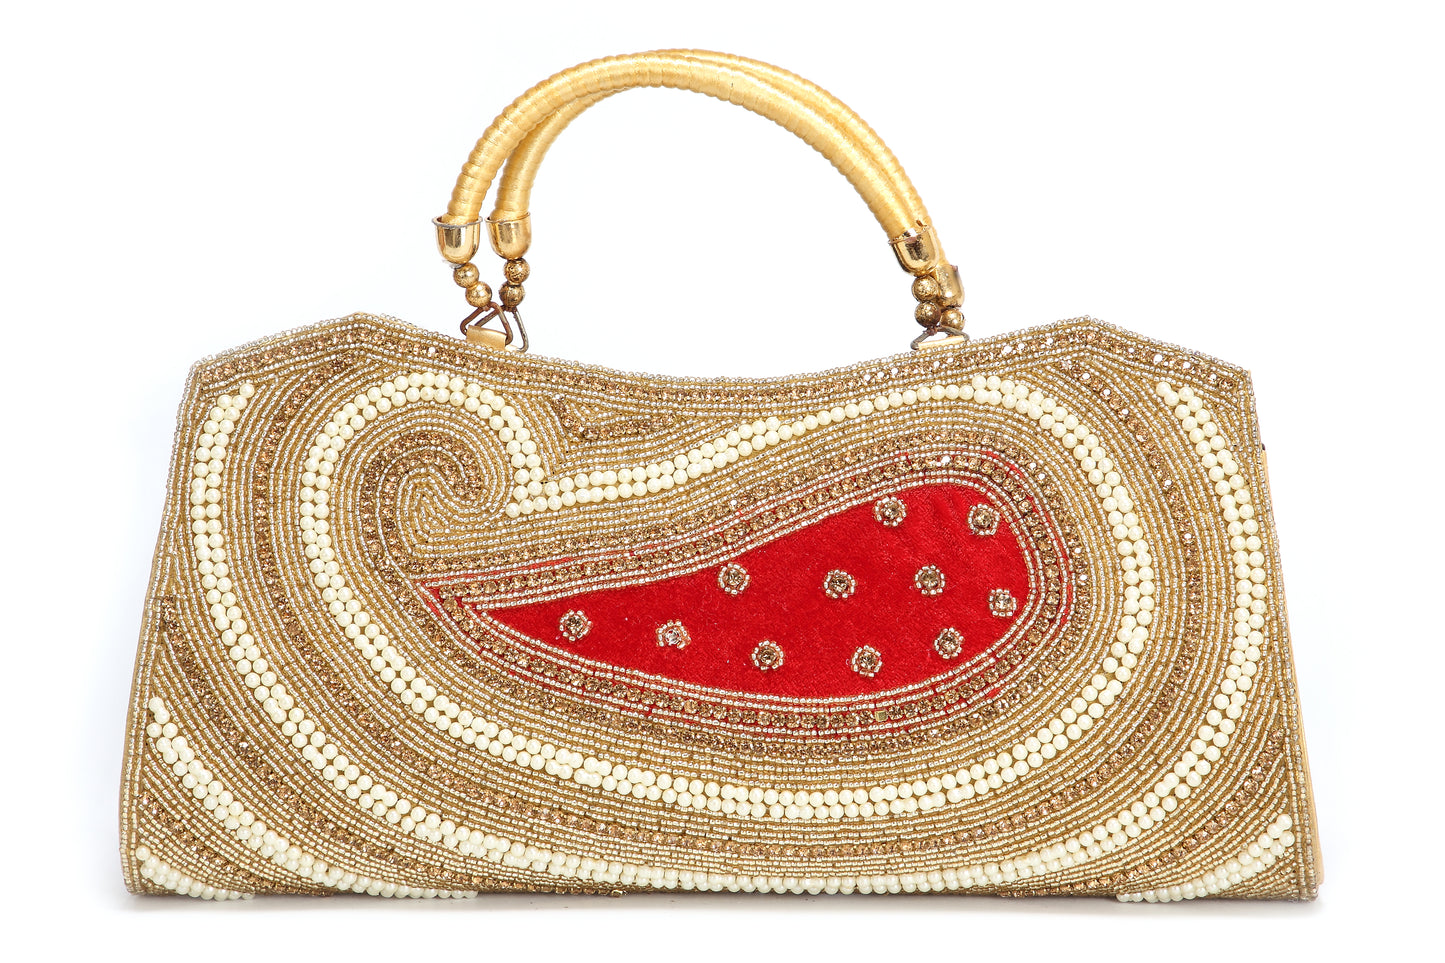 Buy PURSEO Party, Women's/Girls Casual Red Clutch Bag Purse Handbag Wedding  Bridal Gathering Functions (Gold,Maroon) Online at Best Prices in India -  JioMart.